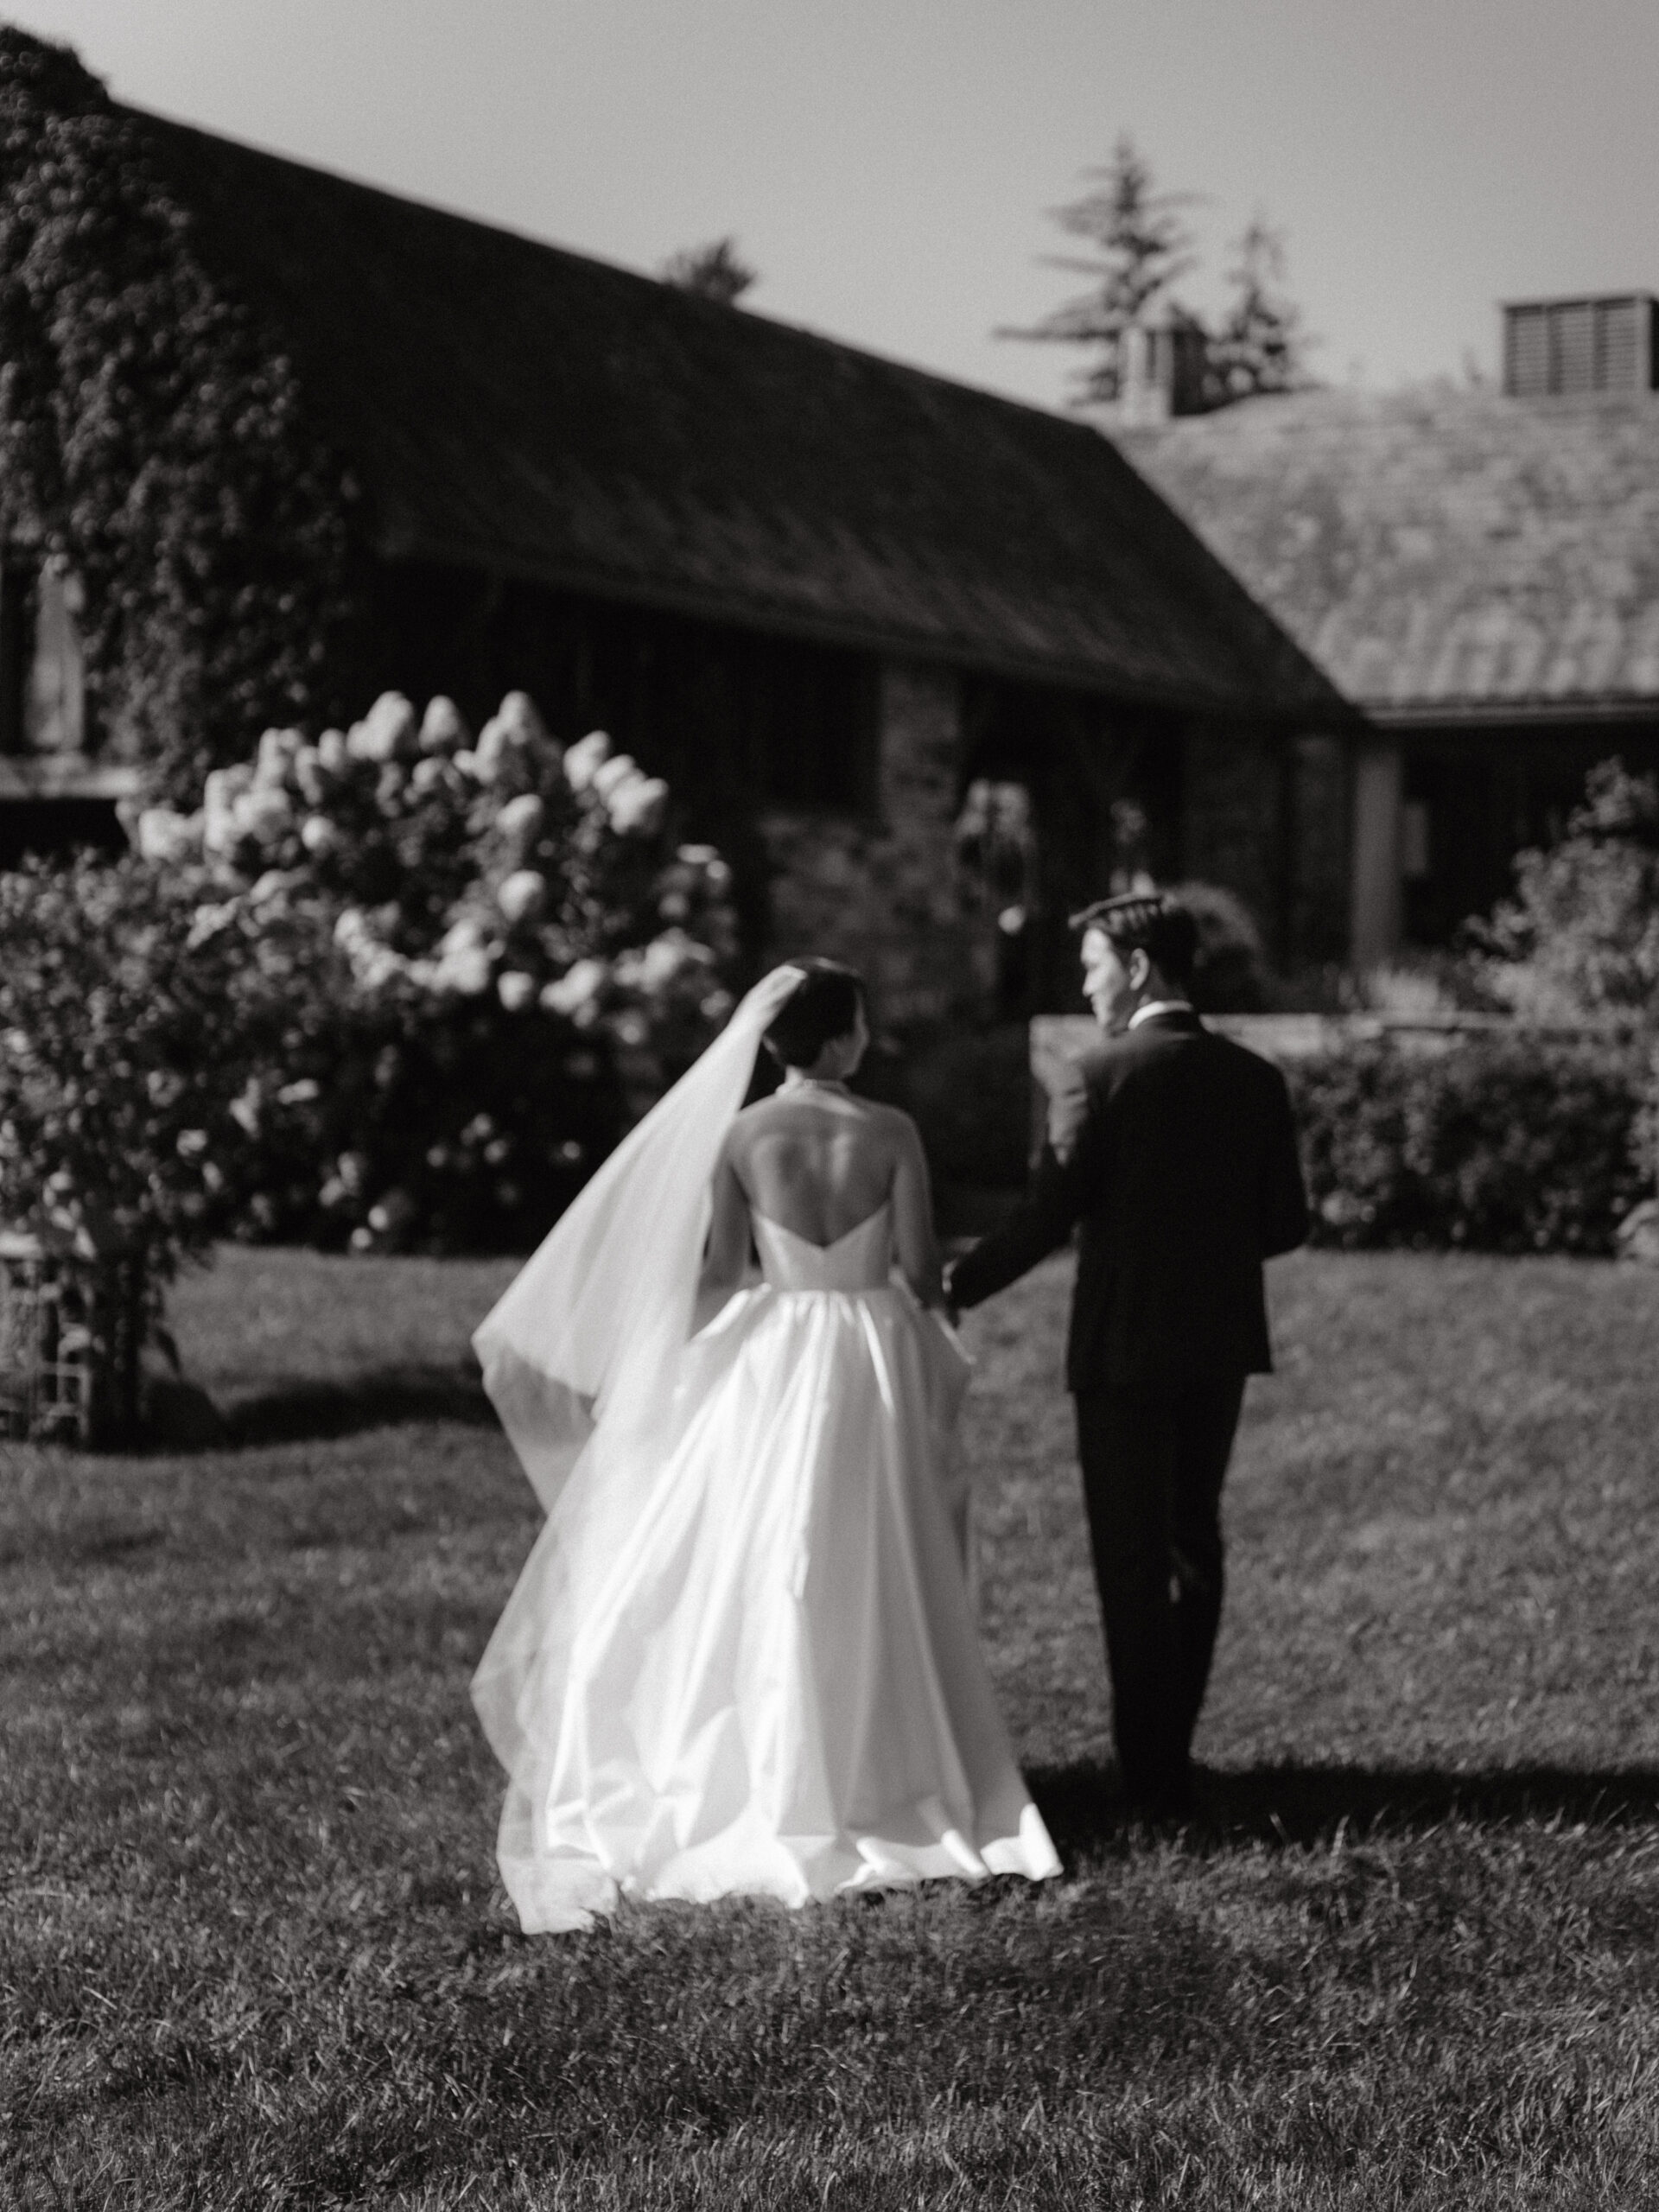 Black and white documentary wedding photography image of the bride and groom walking towards outdoors. Image by Jenny Fu Studio